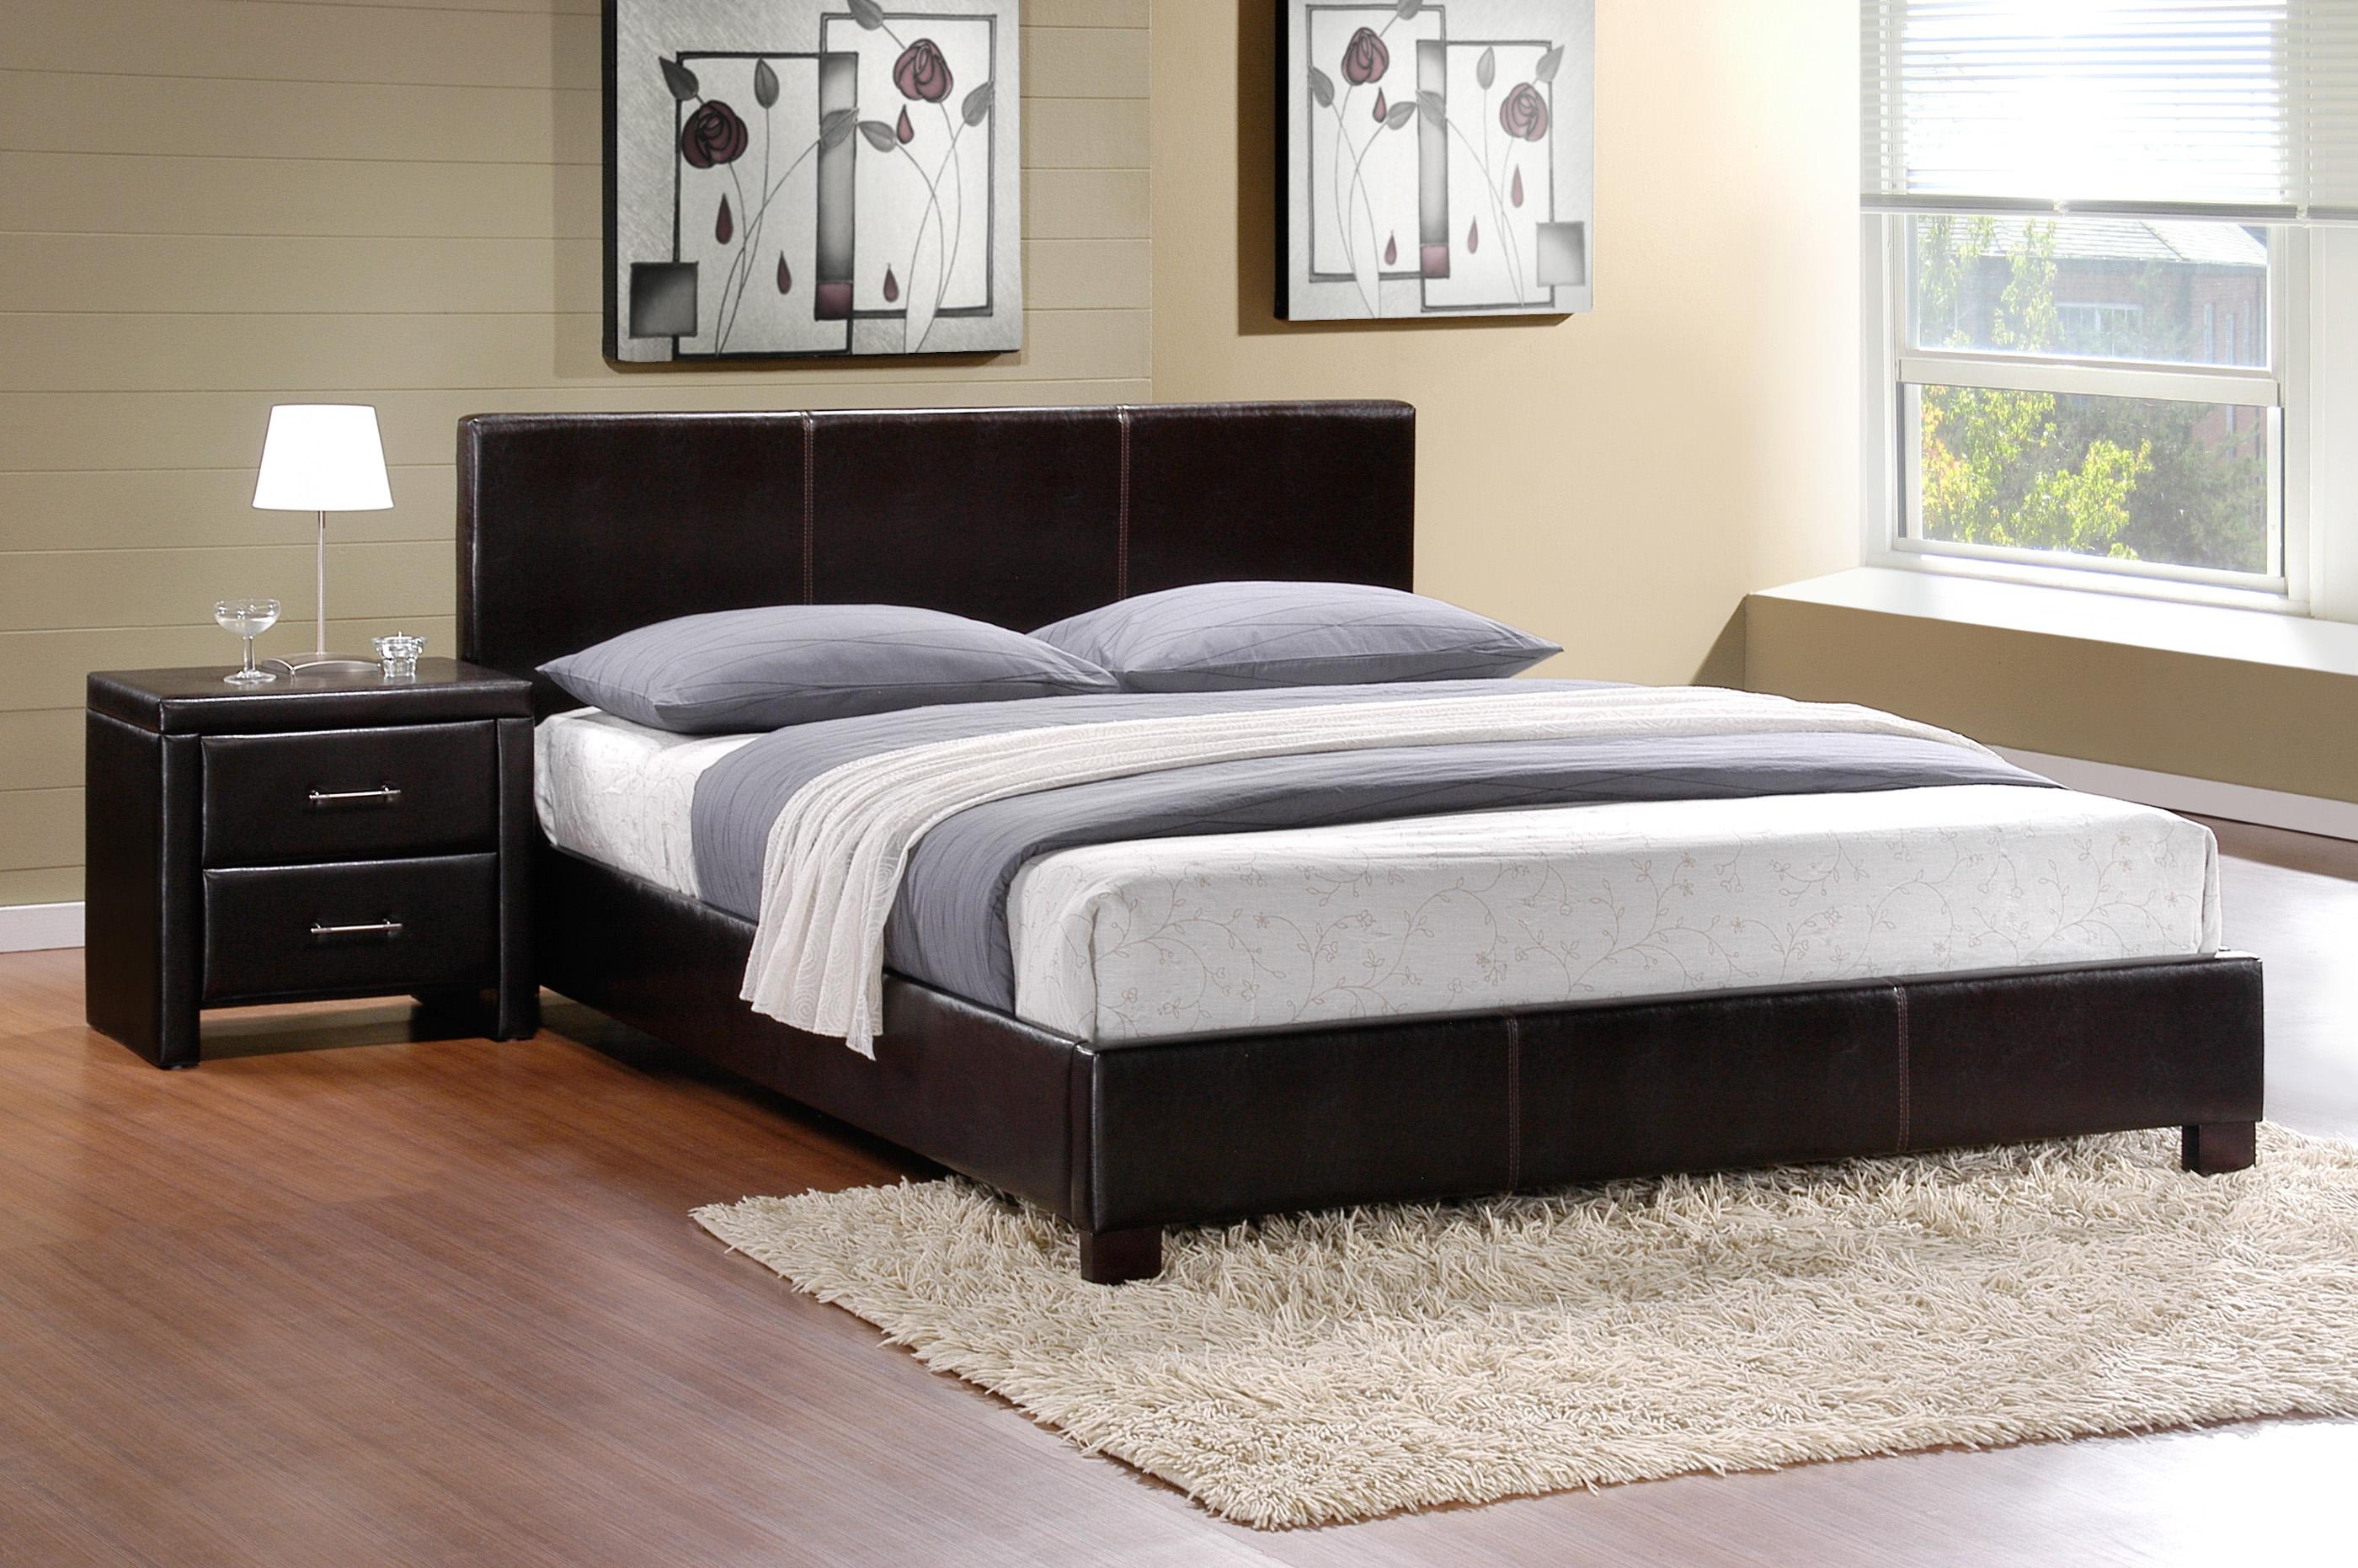 Transitional Bedroom Set 5790-1-3PC Zoey 5790-1-3PC in Dark Brown Faux Leather